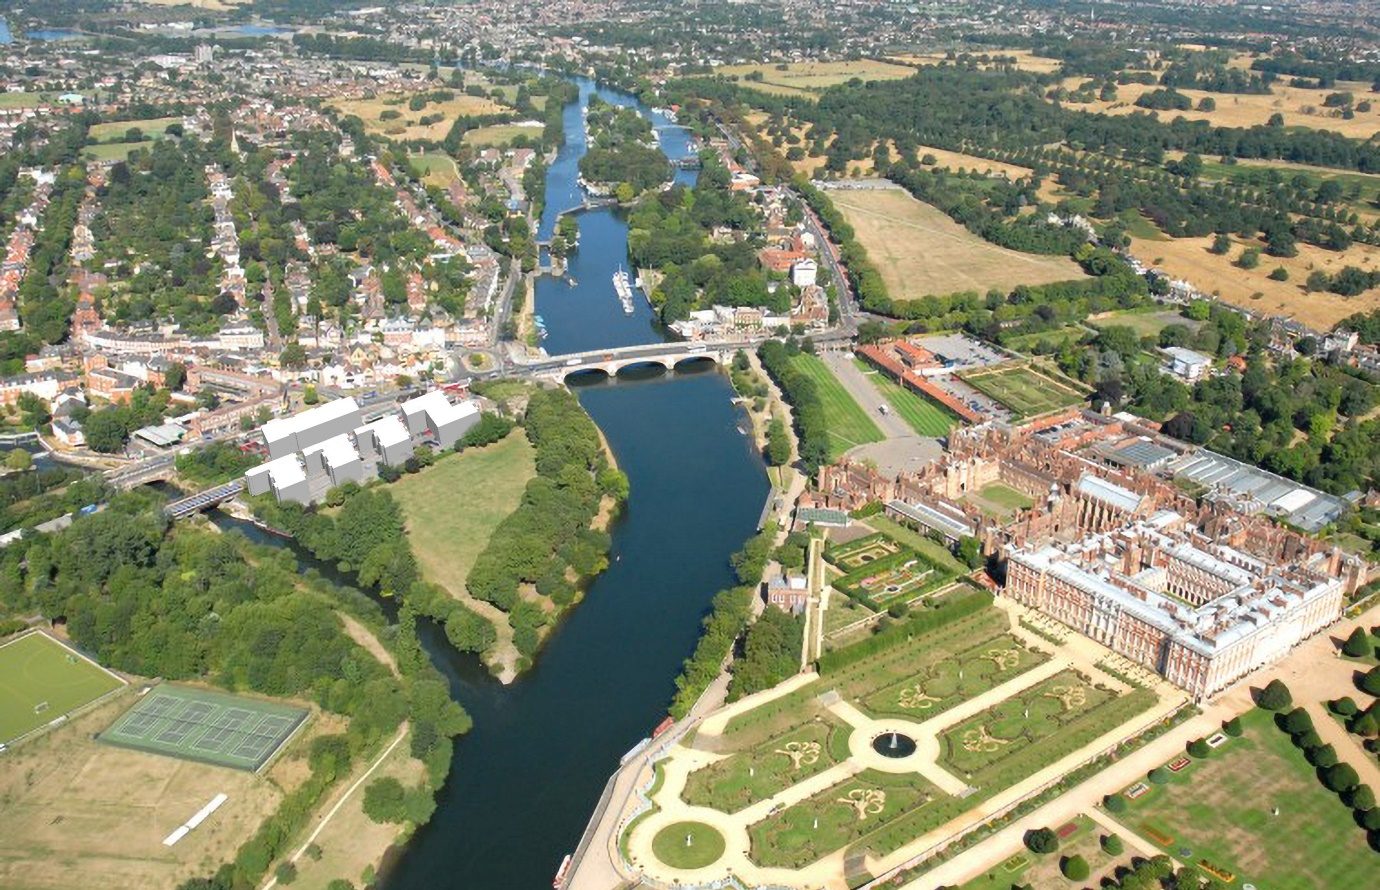 Aerial view of Hampton Court landscape with proposed development